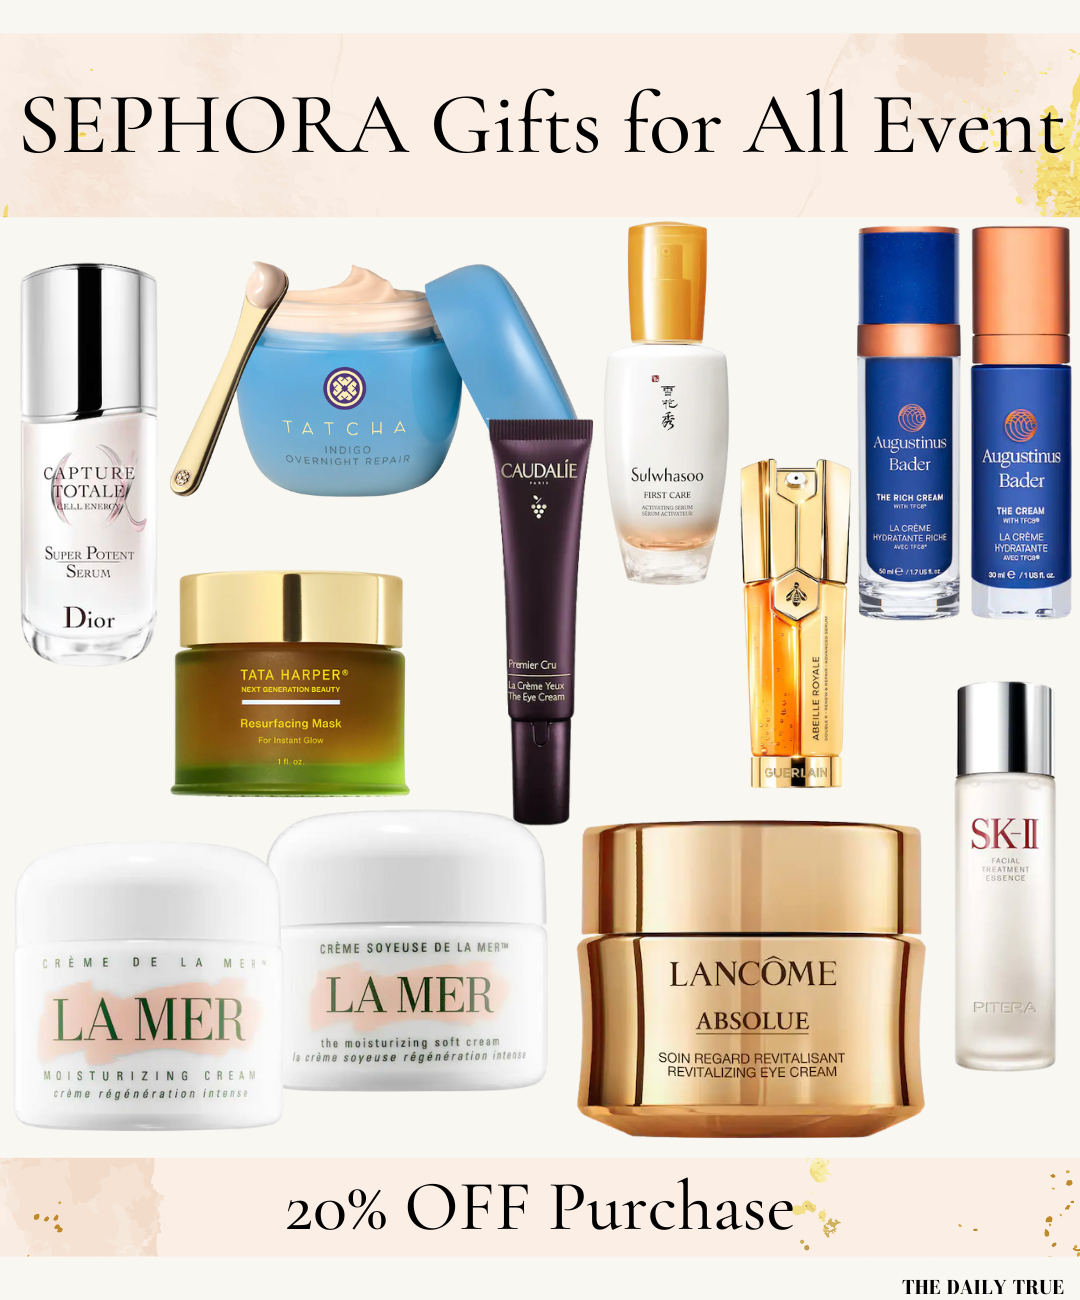 Sephora Gifts for All Event best skincare gifts